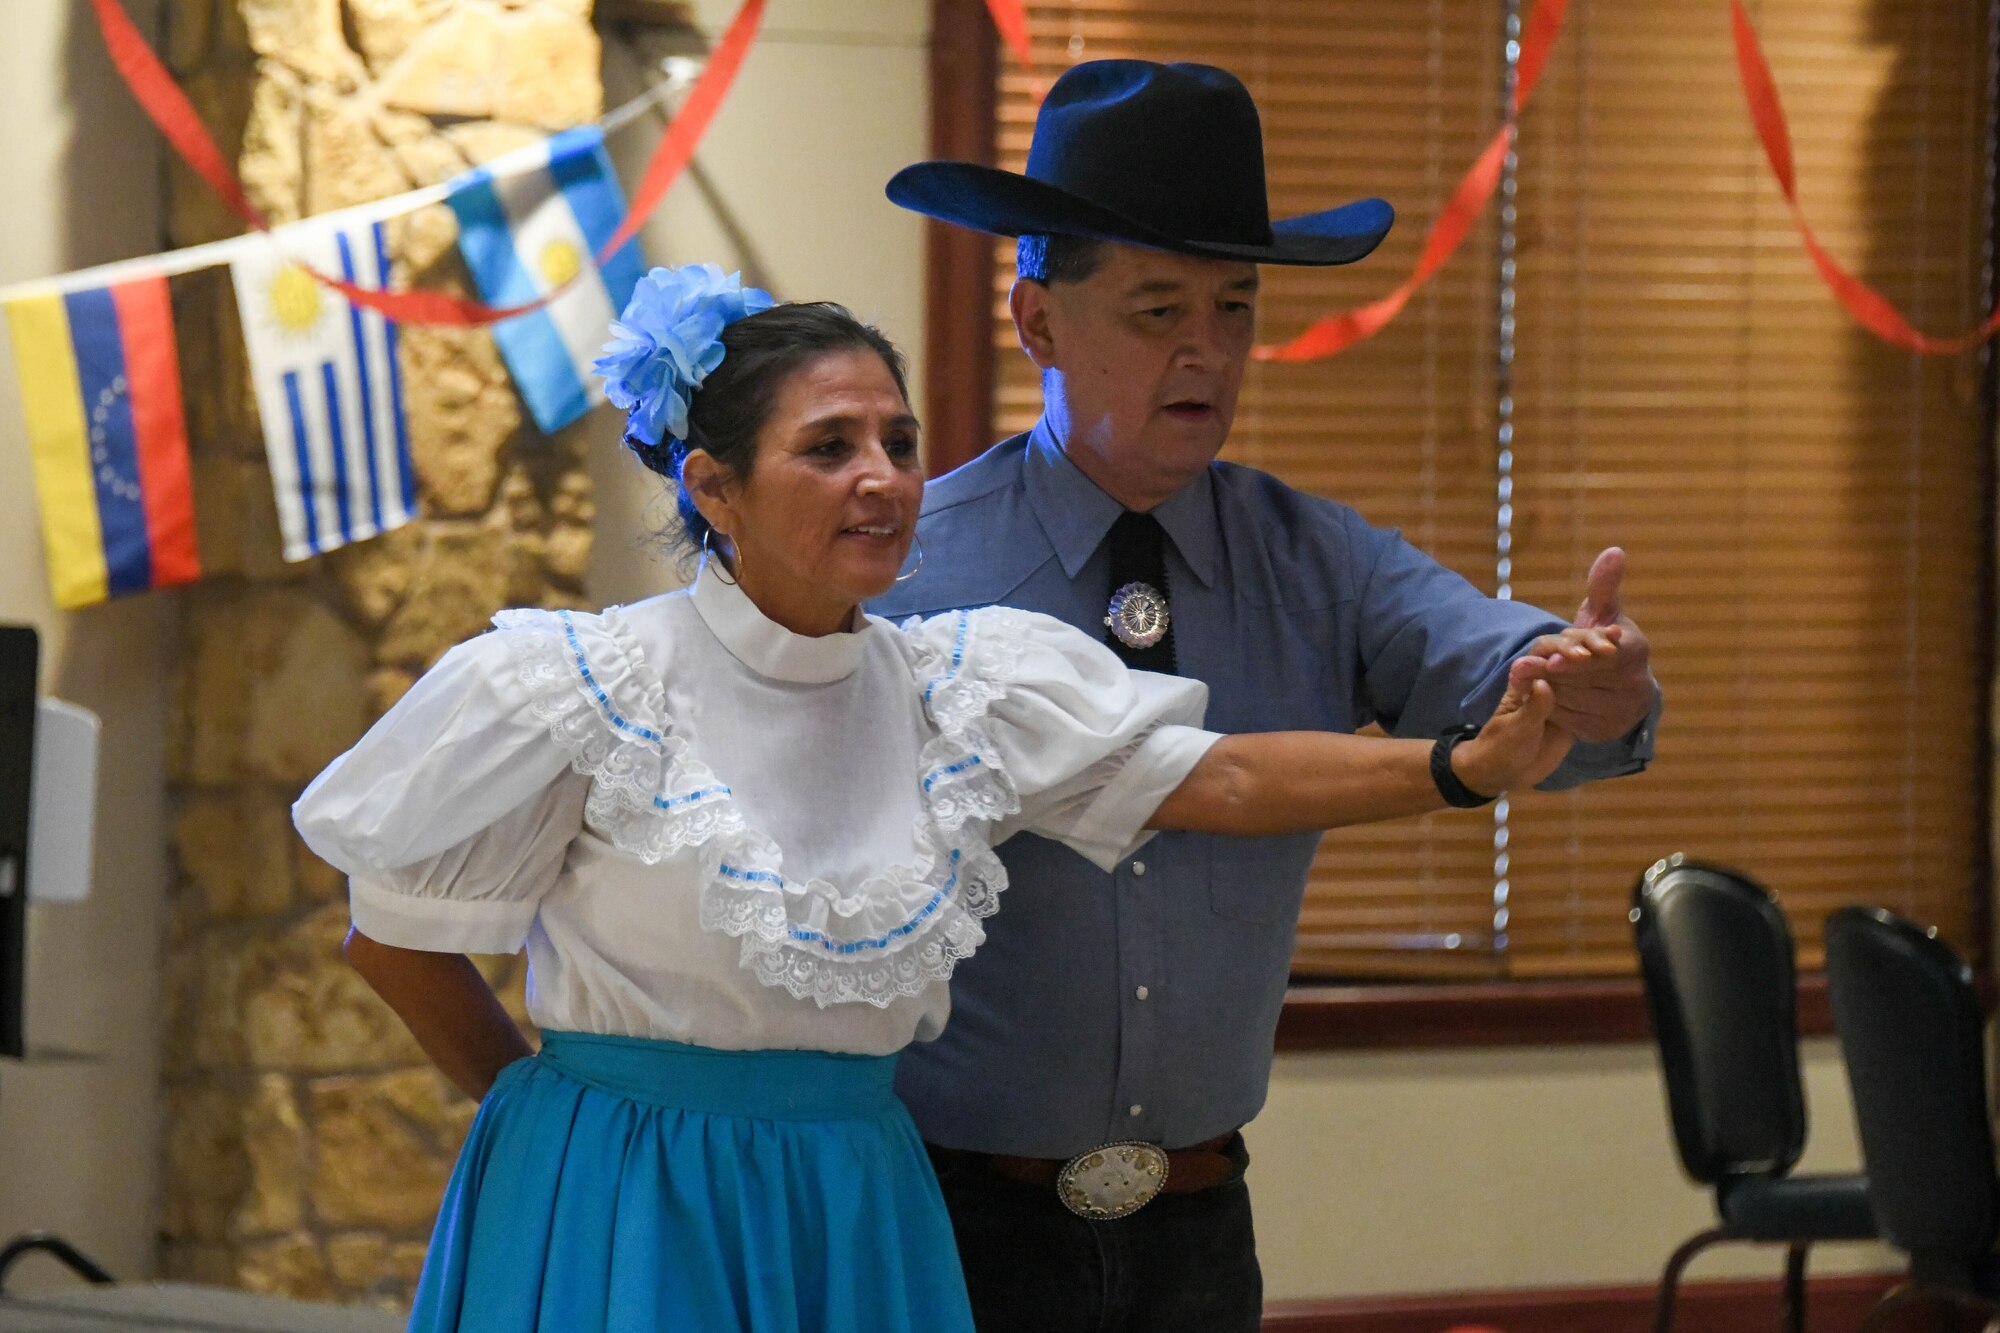 Tijerina Flora Pineda and Gerardo Chavez, Lawton Mexican Folkloric Dance performers, perform a traditional Hispanic dance for Airmen and families at a fiesta on Altus Air Force Base, Oklahoma, October 15, 2021. The performances are an opportunity to showcase different traditional Hispanic dances, as well as educate spectators about different cultures. (U.S. Air Force photo by Airman 1st Class Trenton Jancze)